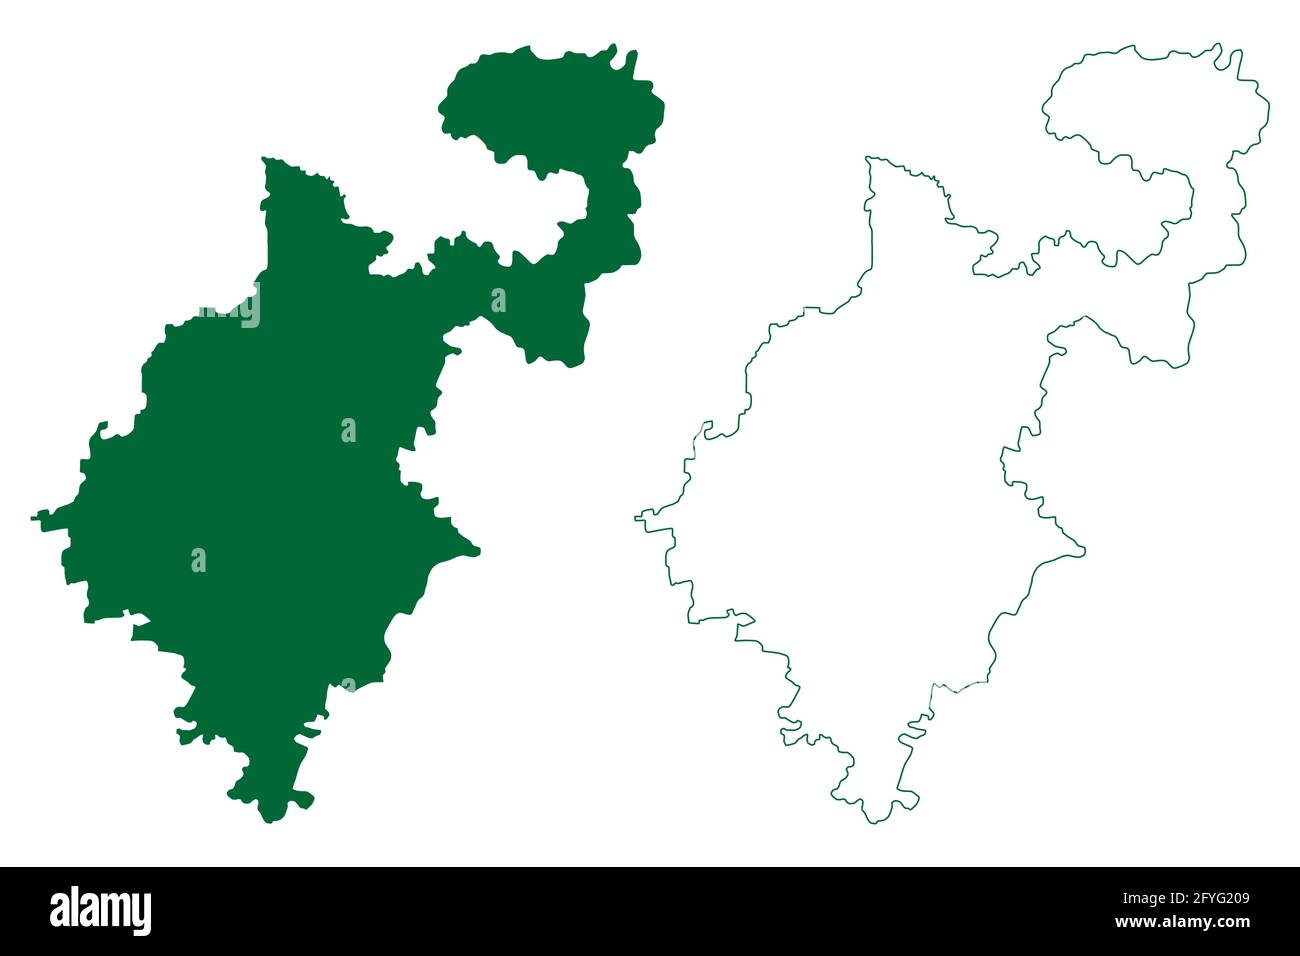 Maharashtra (States and union territories of India, Federated states,  Republic of India) map vector illustration, scribble sketch Maharashtra  (MH) state map:: tasmeemME.com